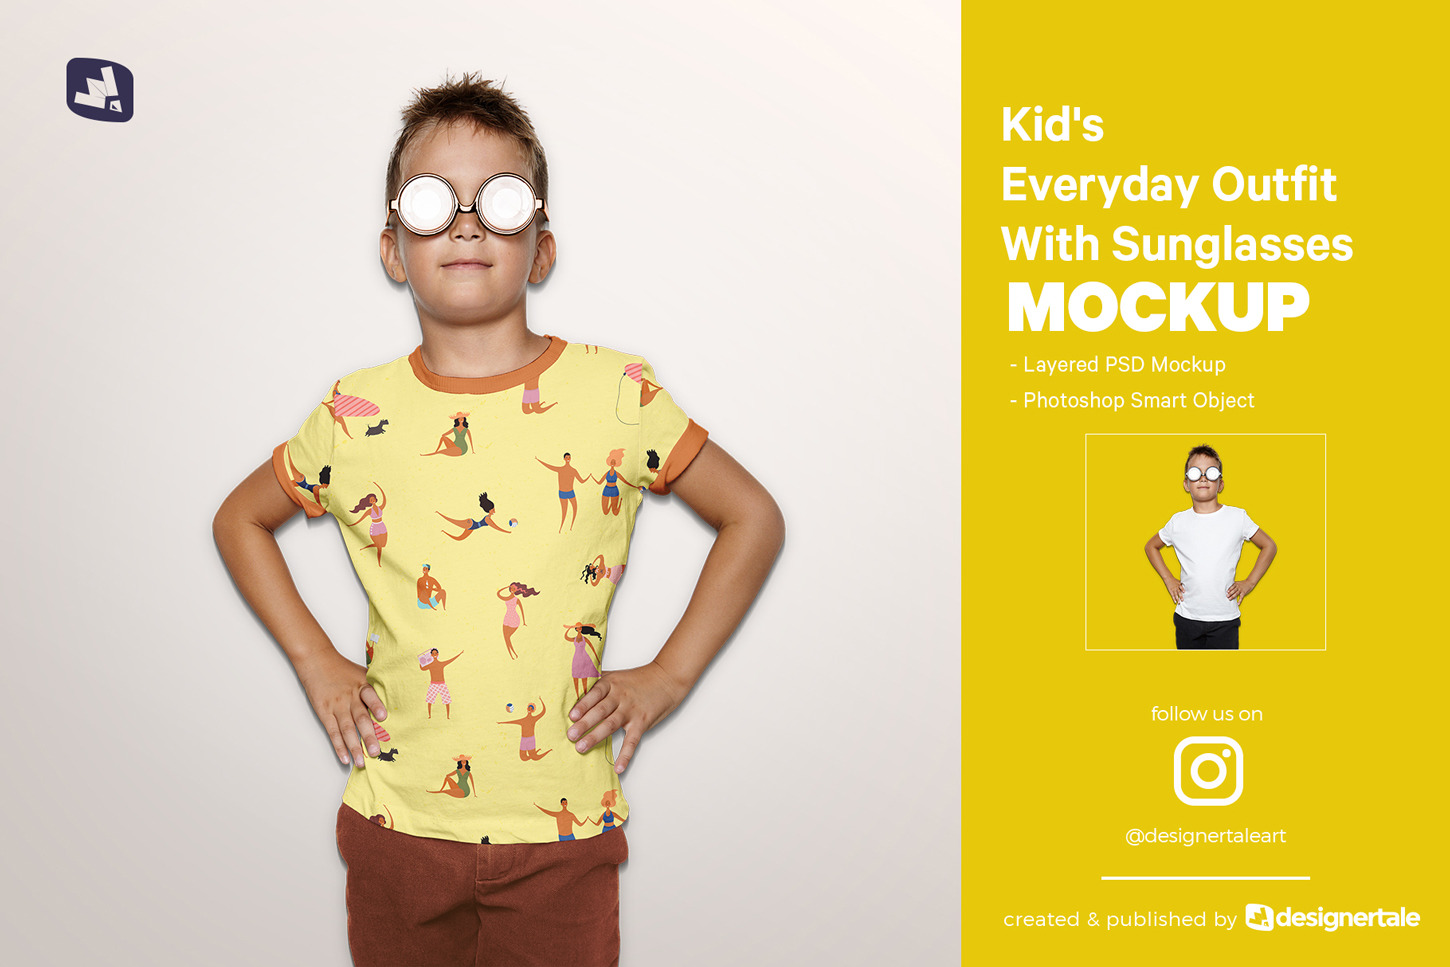 Kid’s Everyday Outfit Mockup With Sunglasses